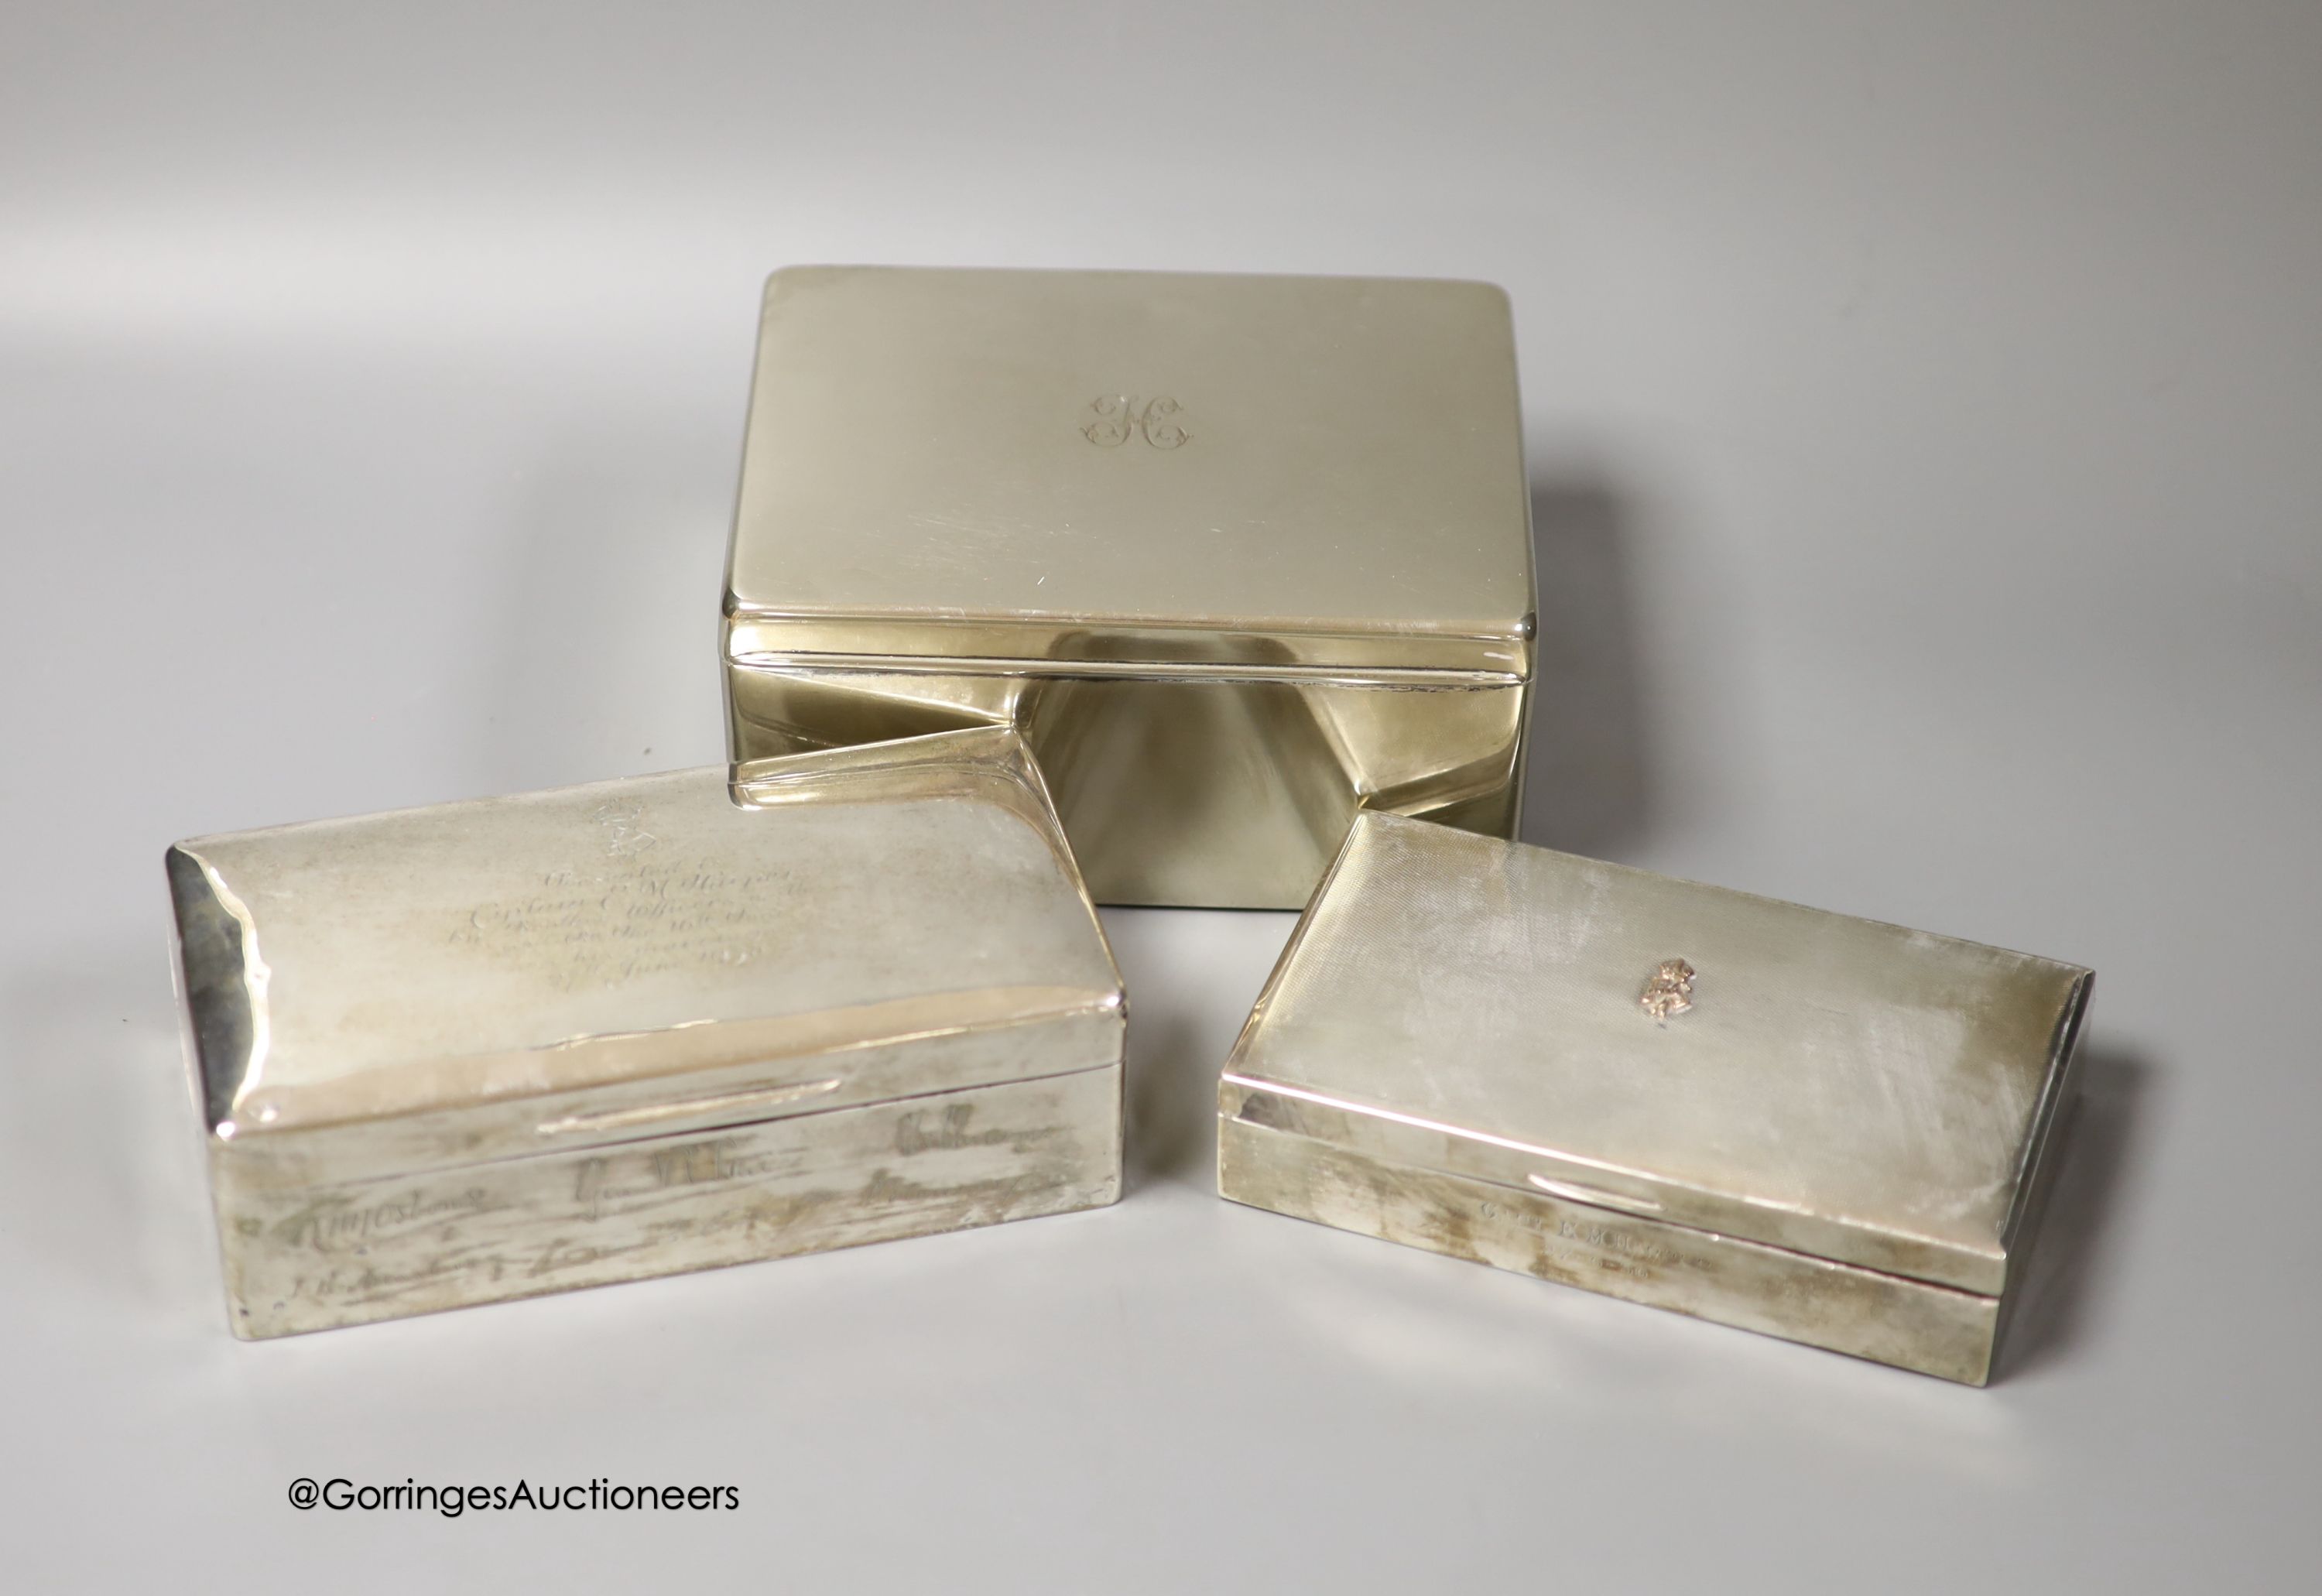 Three 20th century silver mounted cigarette boxes, two with engraved signatures, largest 16.2cm.